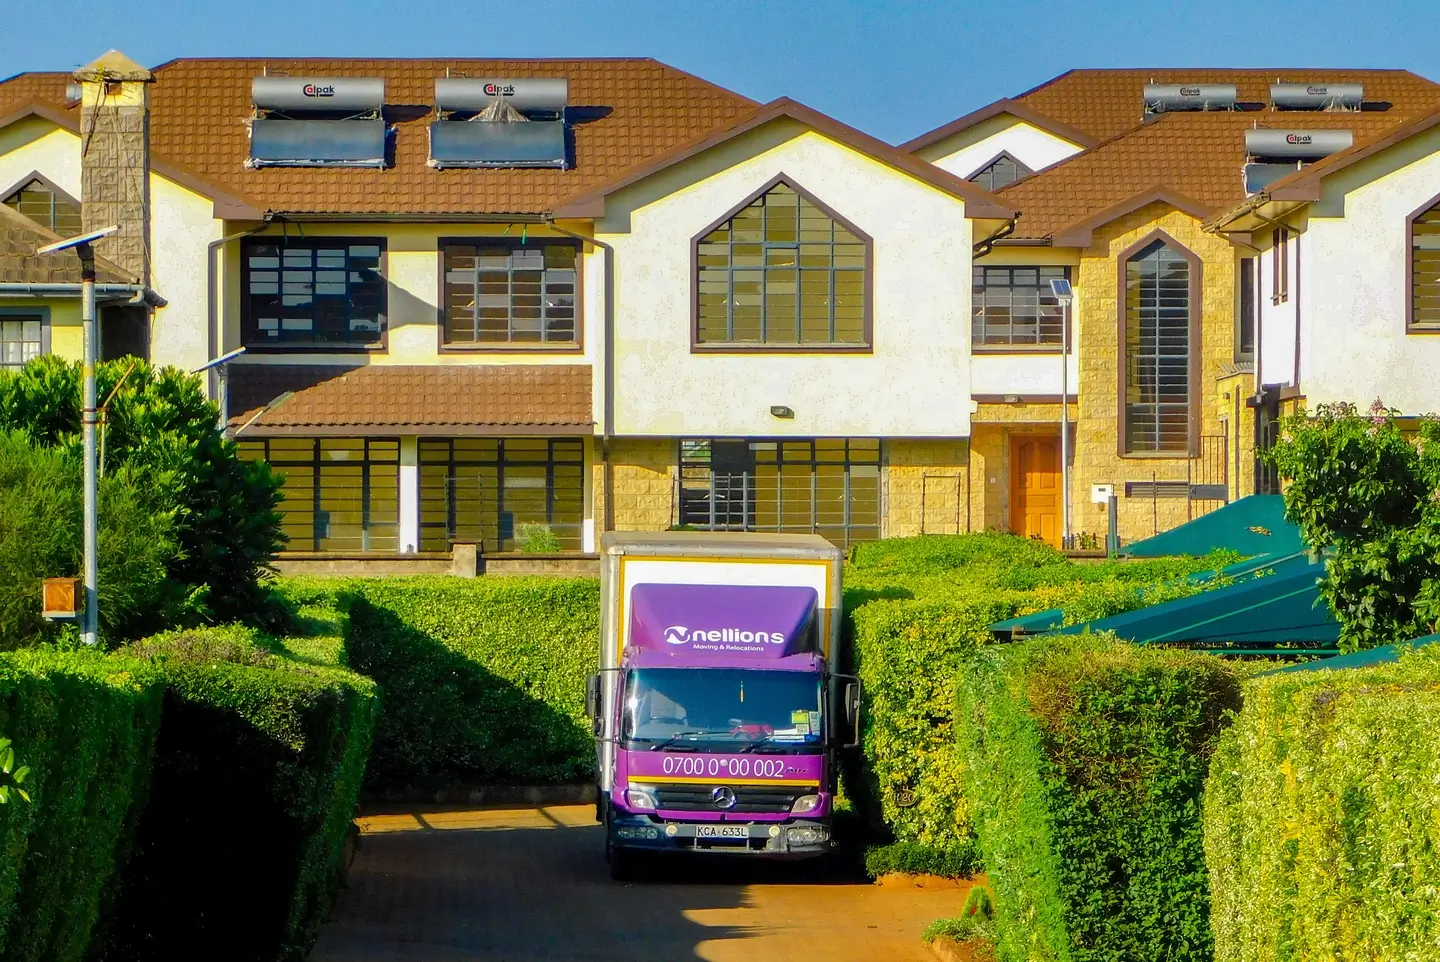 Nellions is the top moving company in Nairobi for household domestic relocation and door-to-door moving services in Kenya at affordable cheap prices